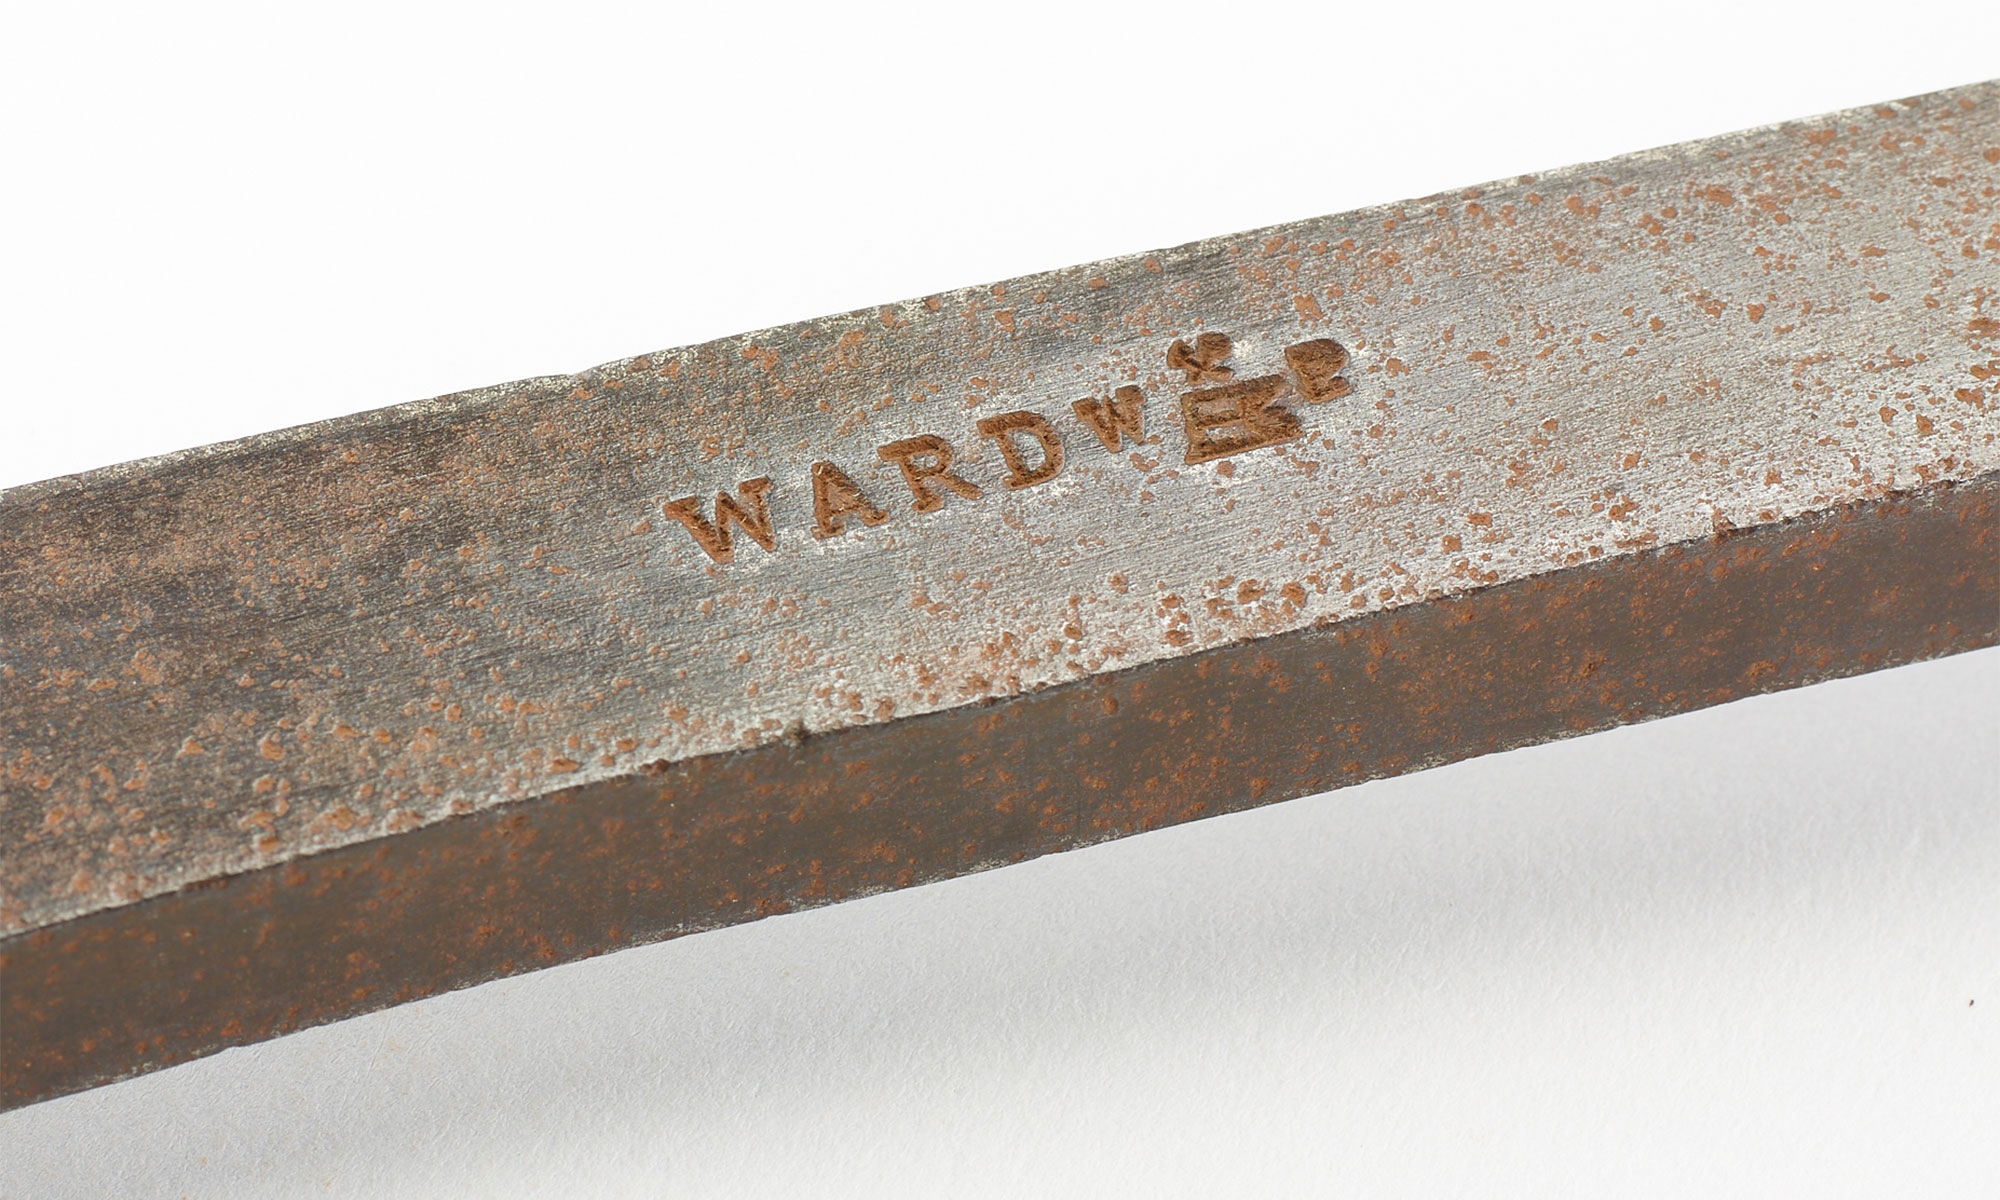 The Ward marking on the chisel